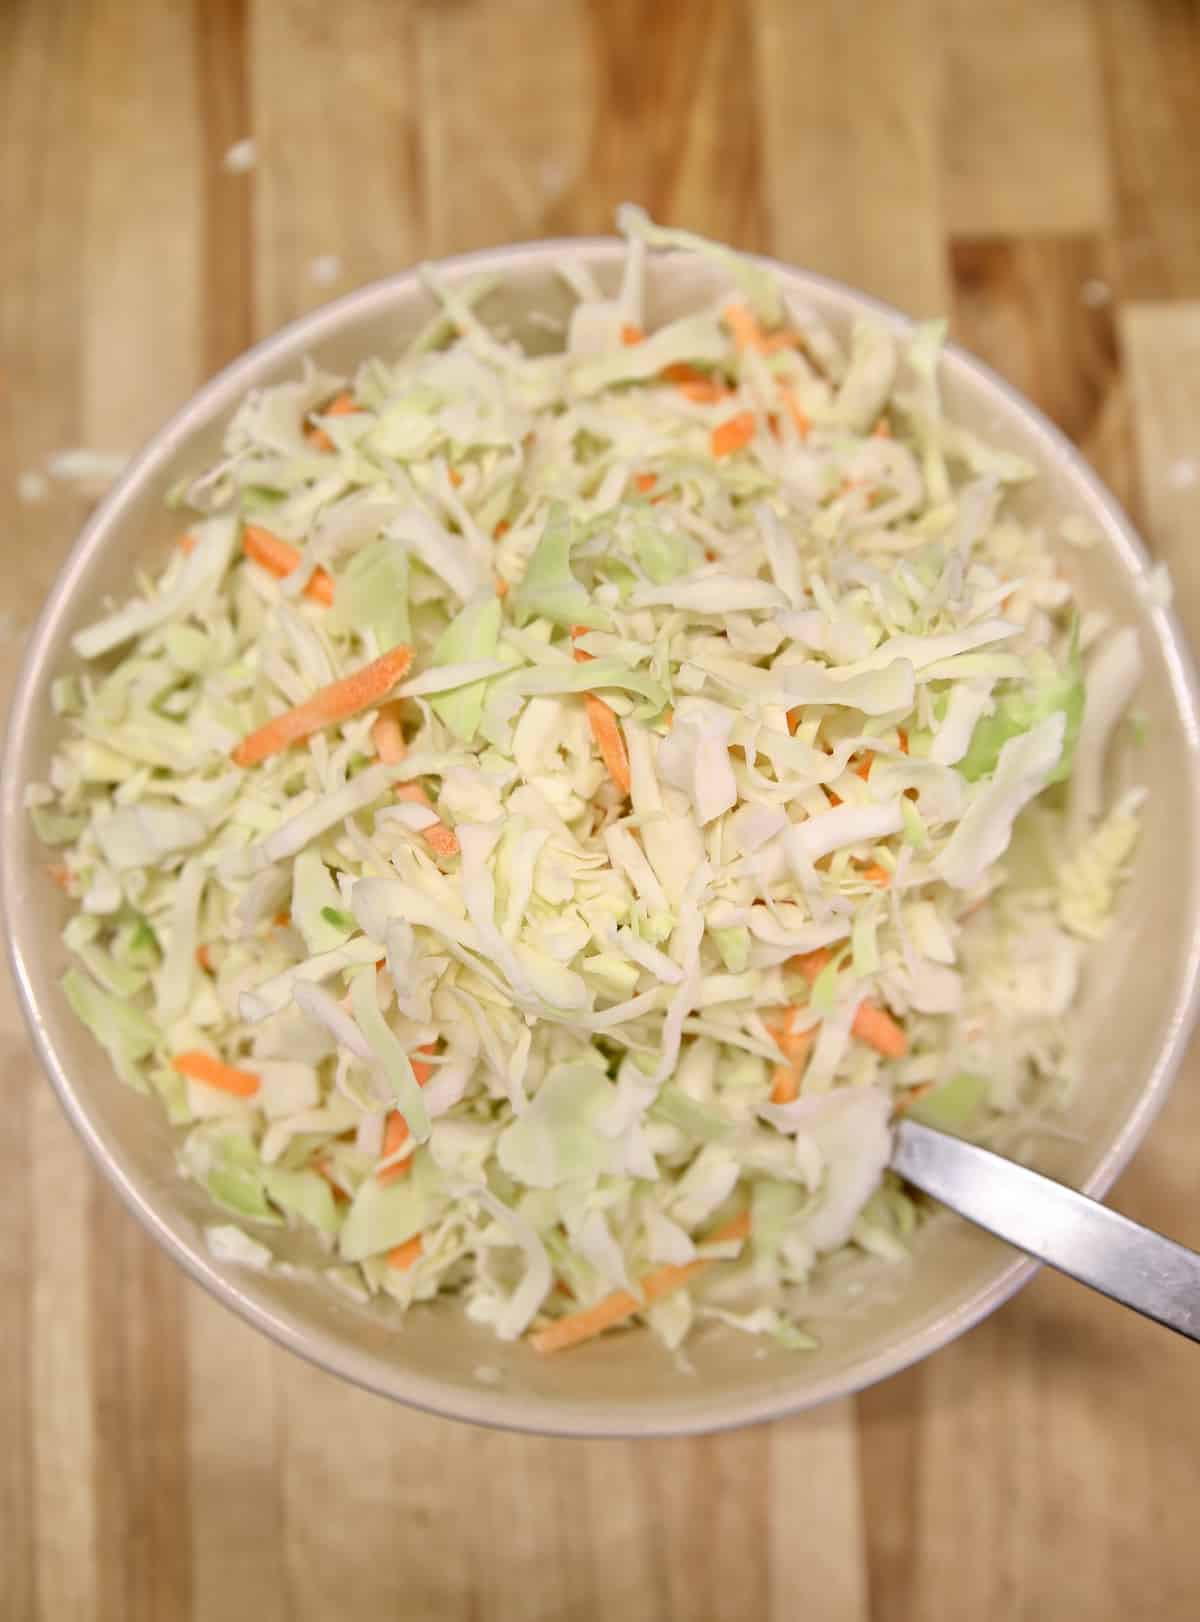 Bowl with cabbage, carrots, slaw dressing.